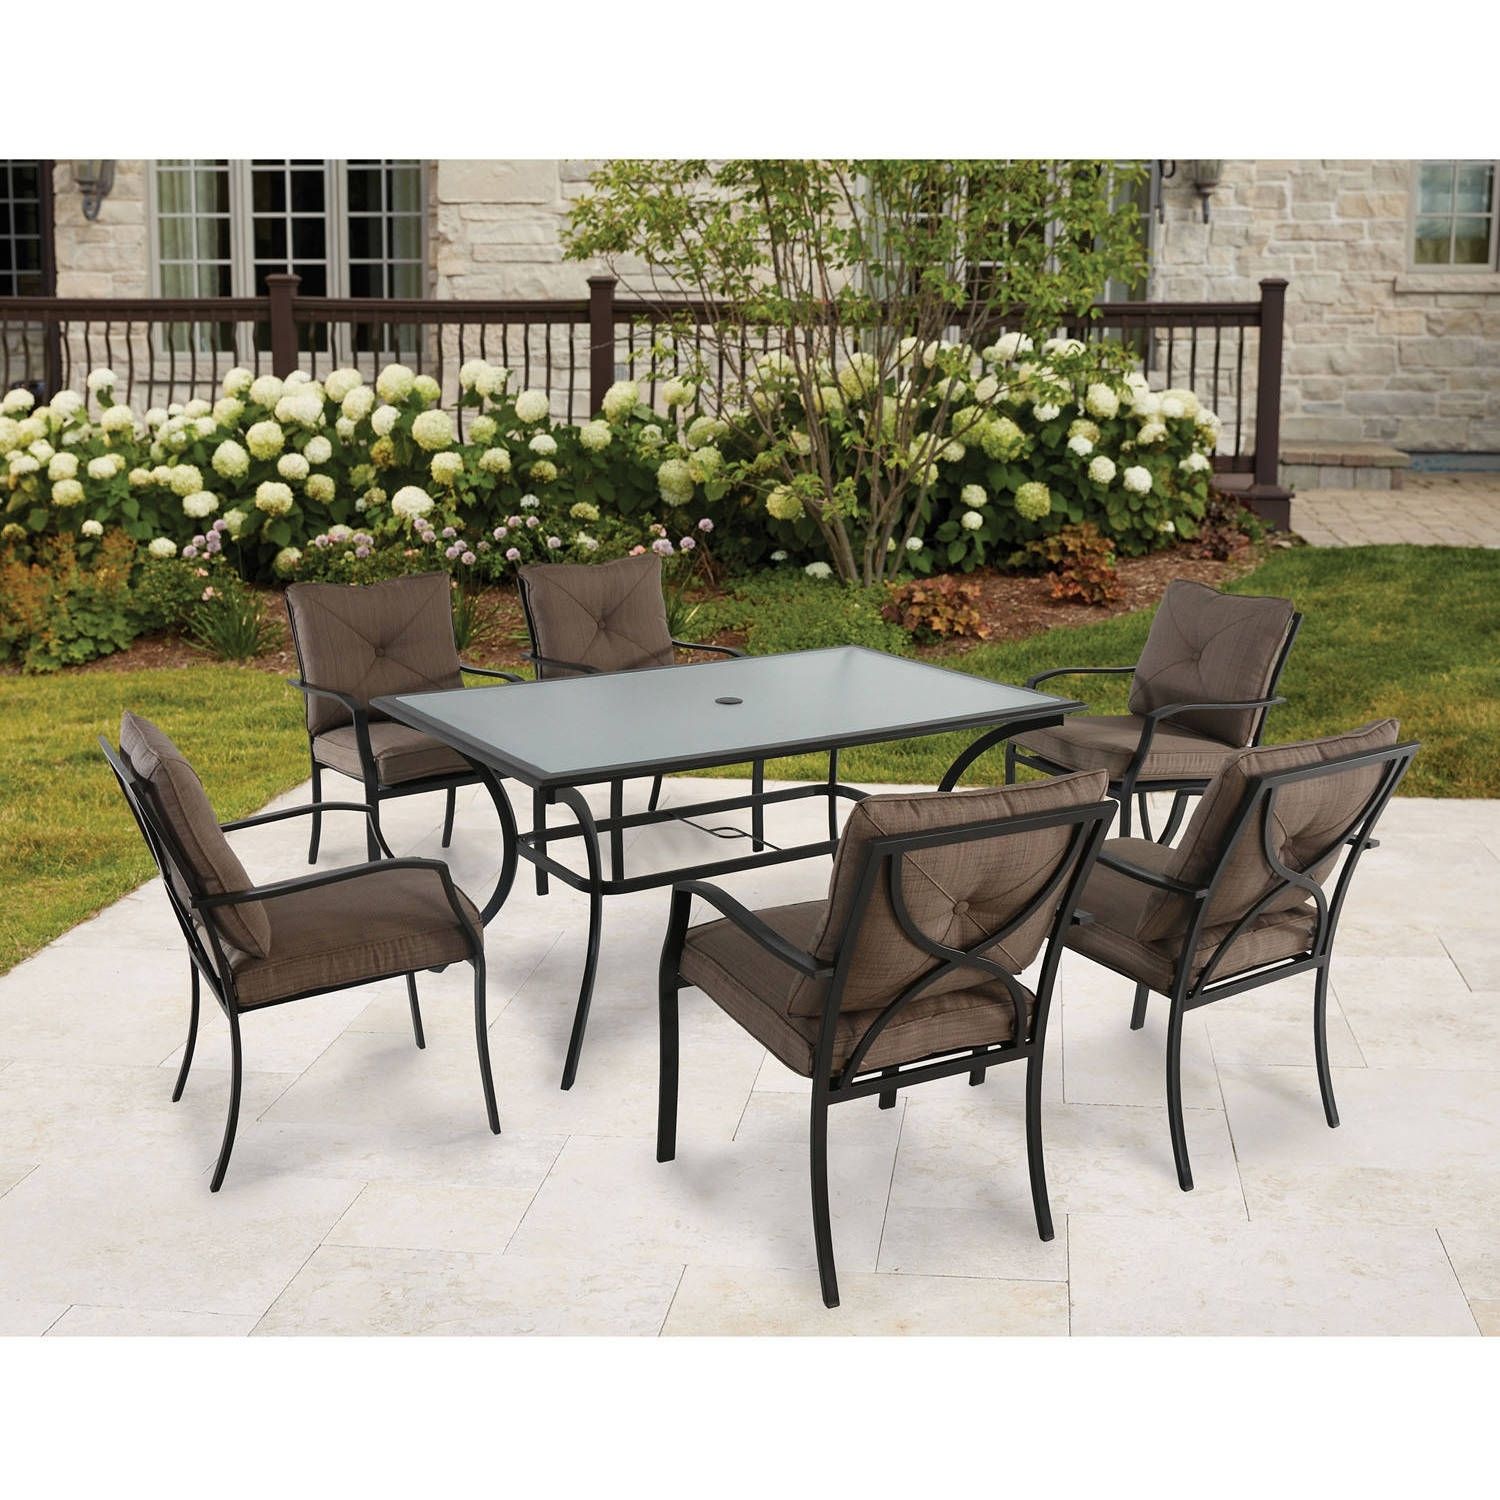 Cambridge Crawford 7 Piece Outdoor Dining Set – Walmart In Current Crawford 6 Piece Rectangle Dining Sets (View 17 of 20)